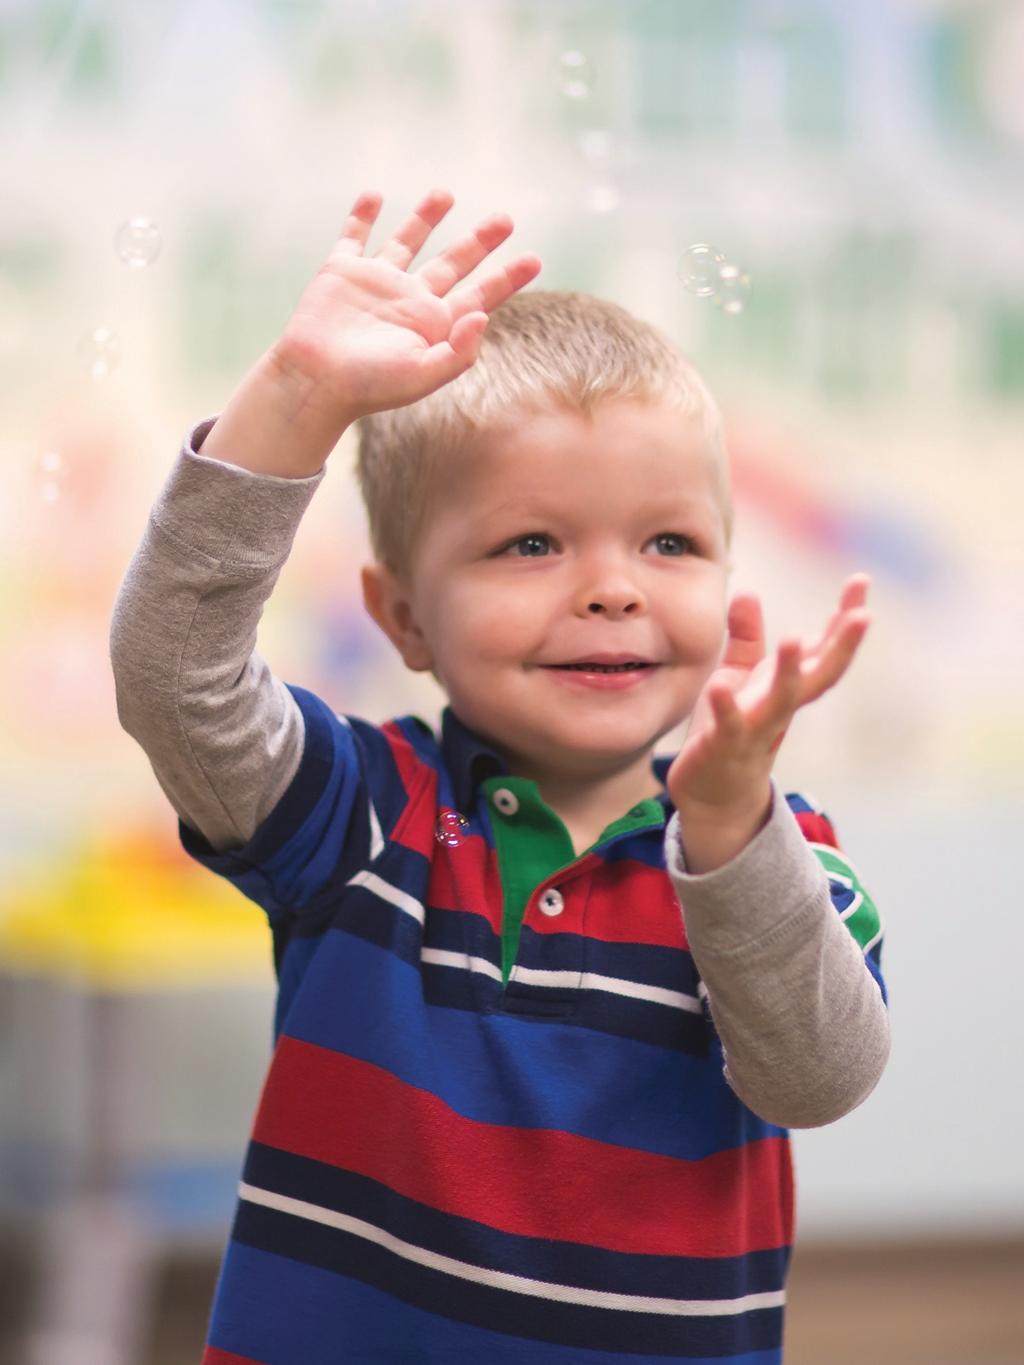 TODDLERS - TWO S Connection Points: God made me, God loves me I am learning that church is a friendly, loving, and caring place I am learning that I am a child of God and God loves me I am learning